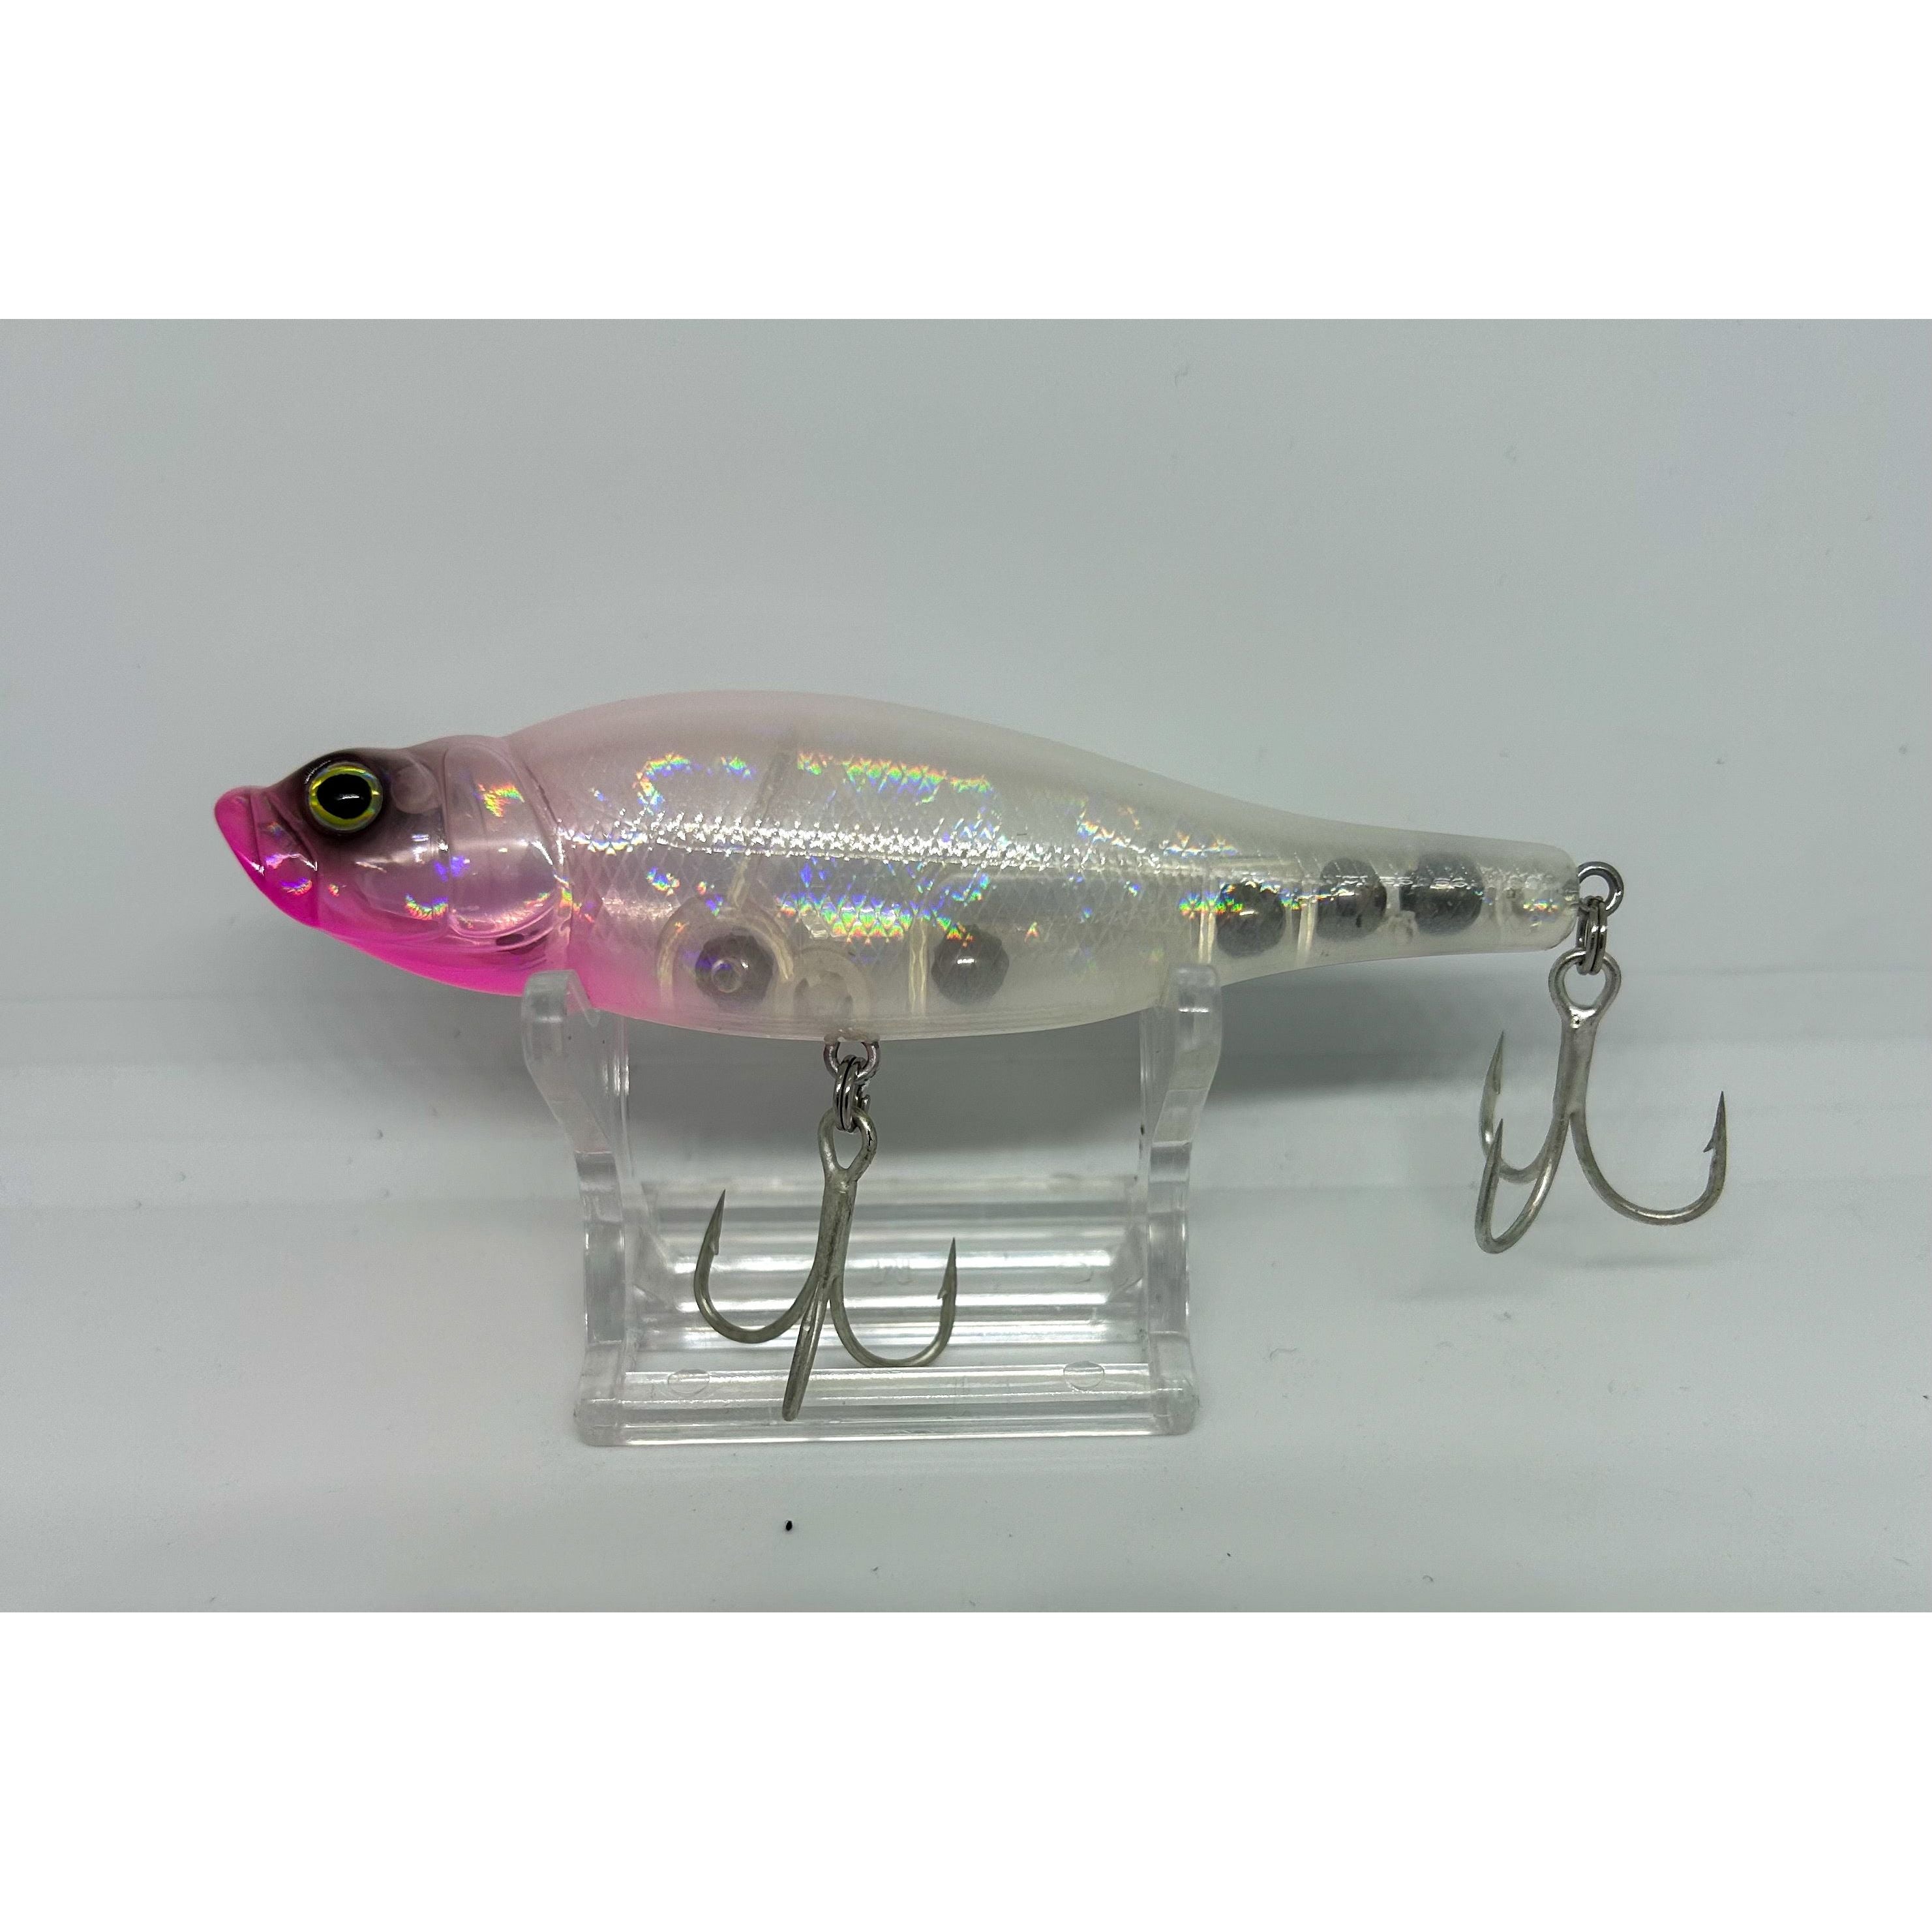 Small Surface Lure 95mm 17g